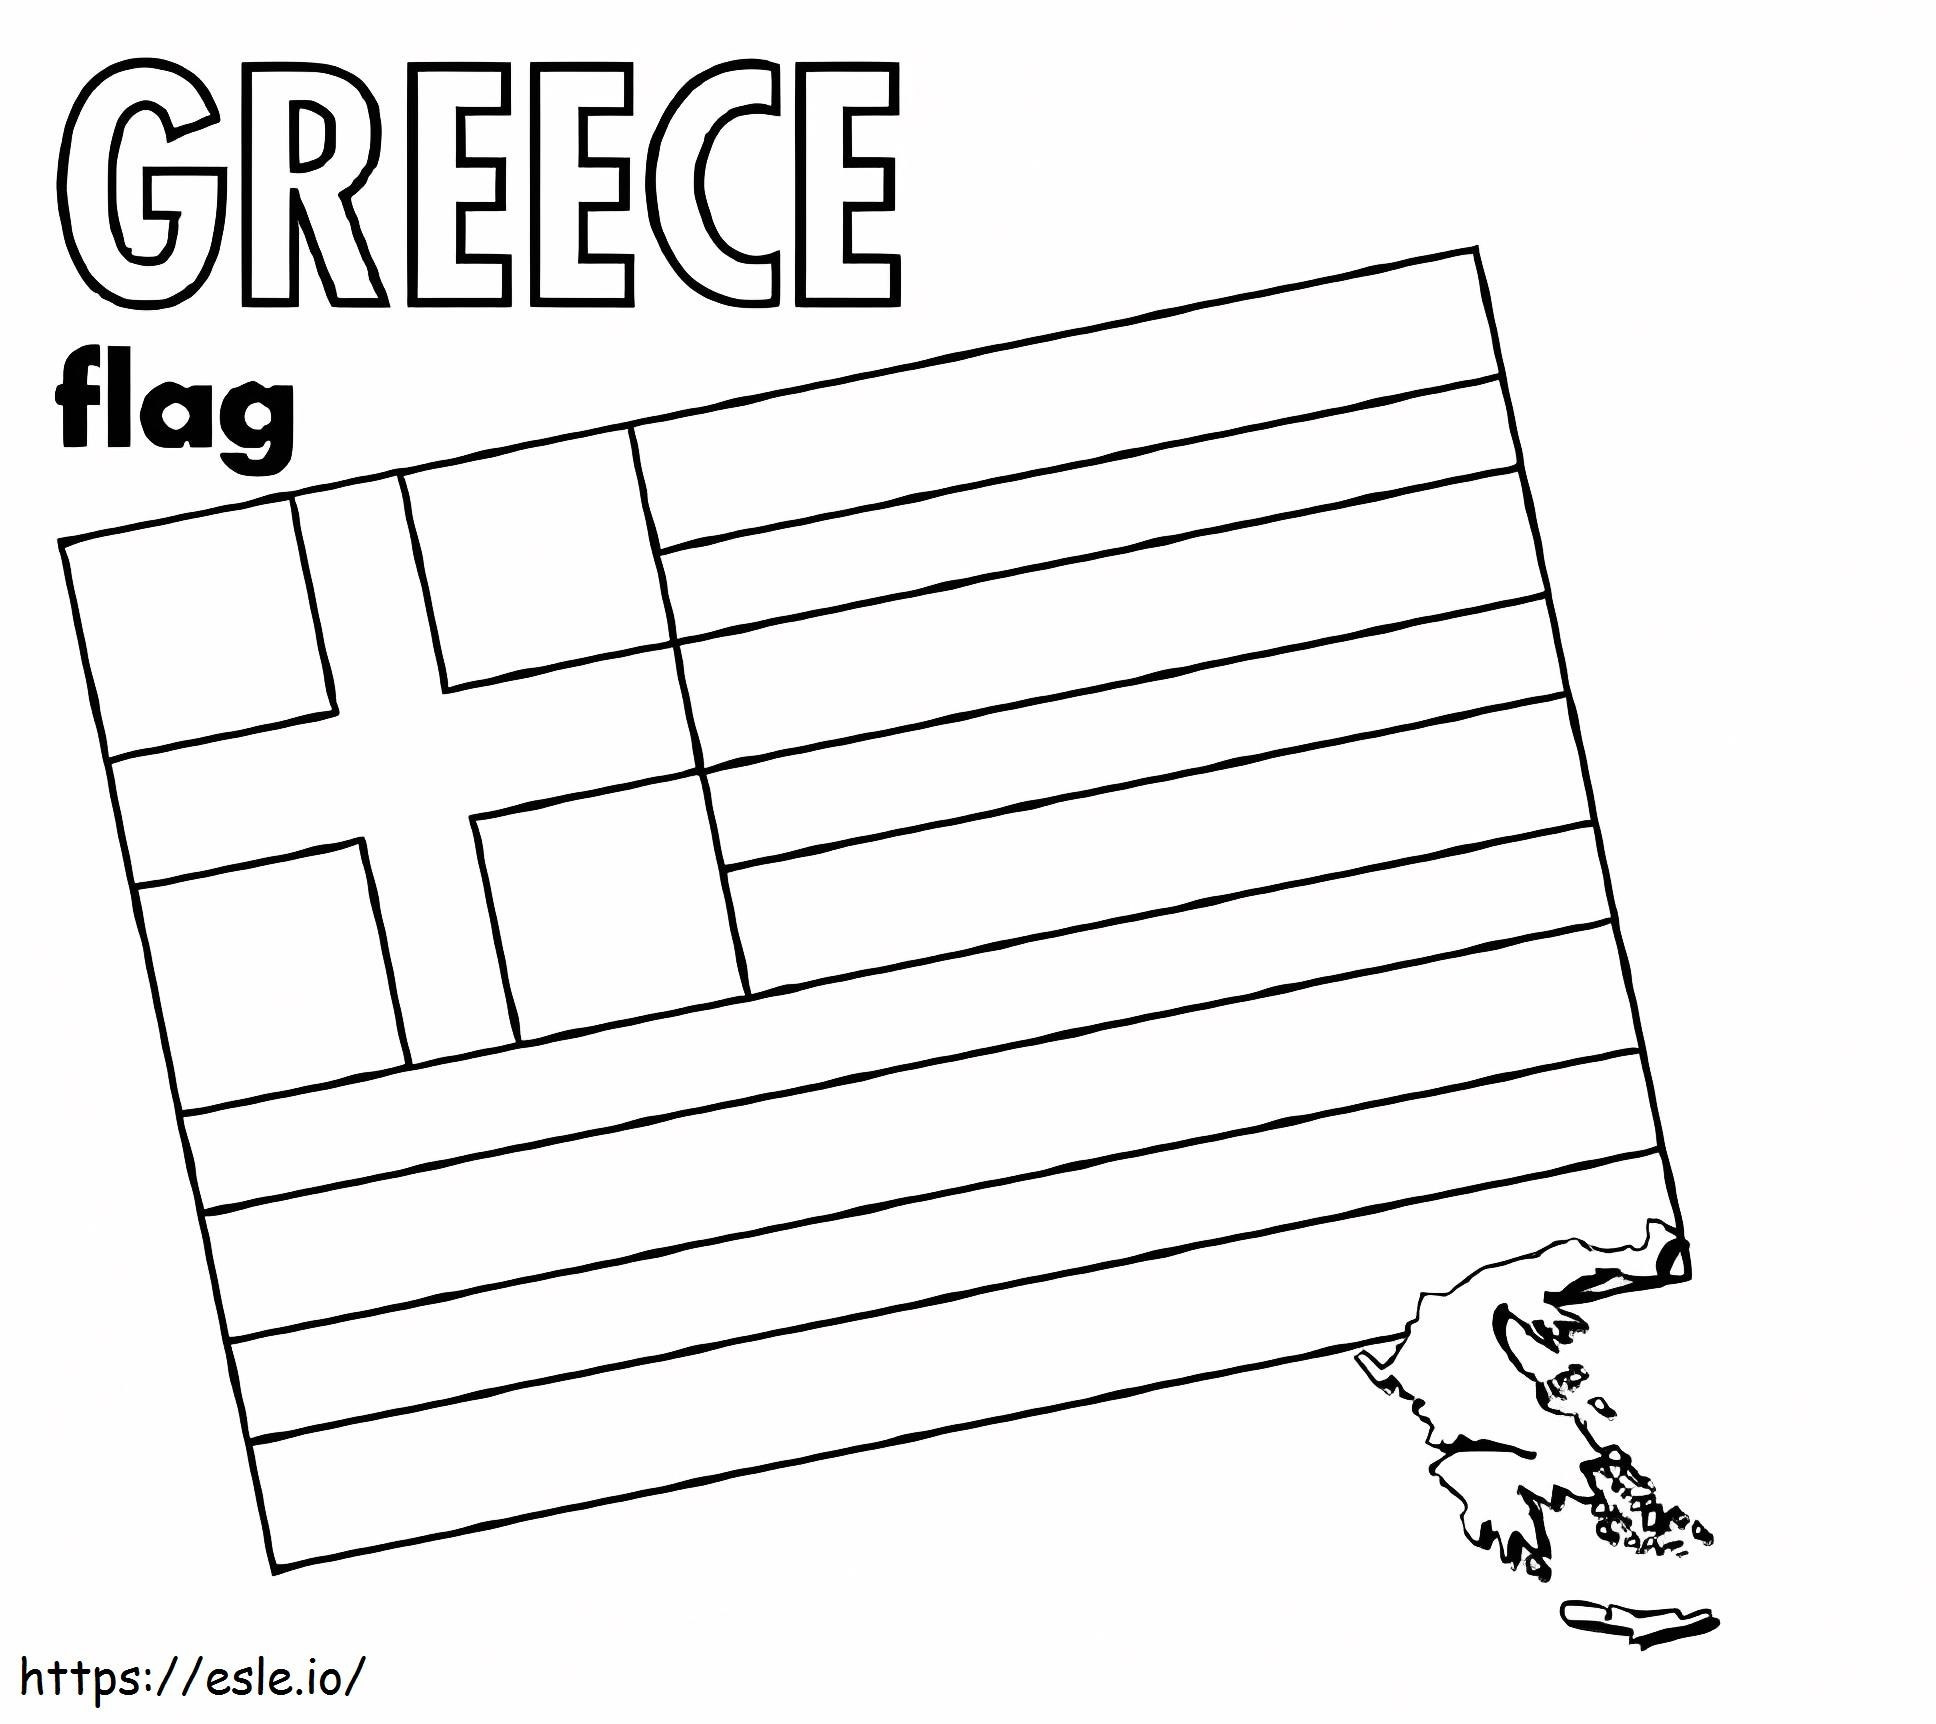 Greece Flag coloring page